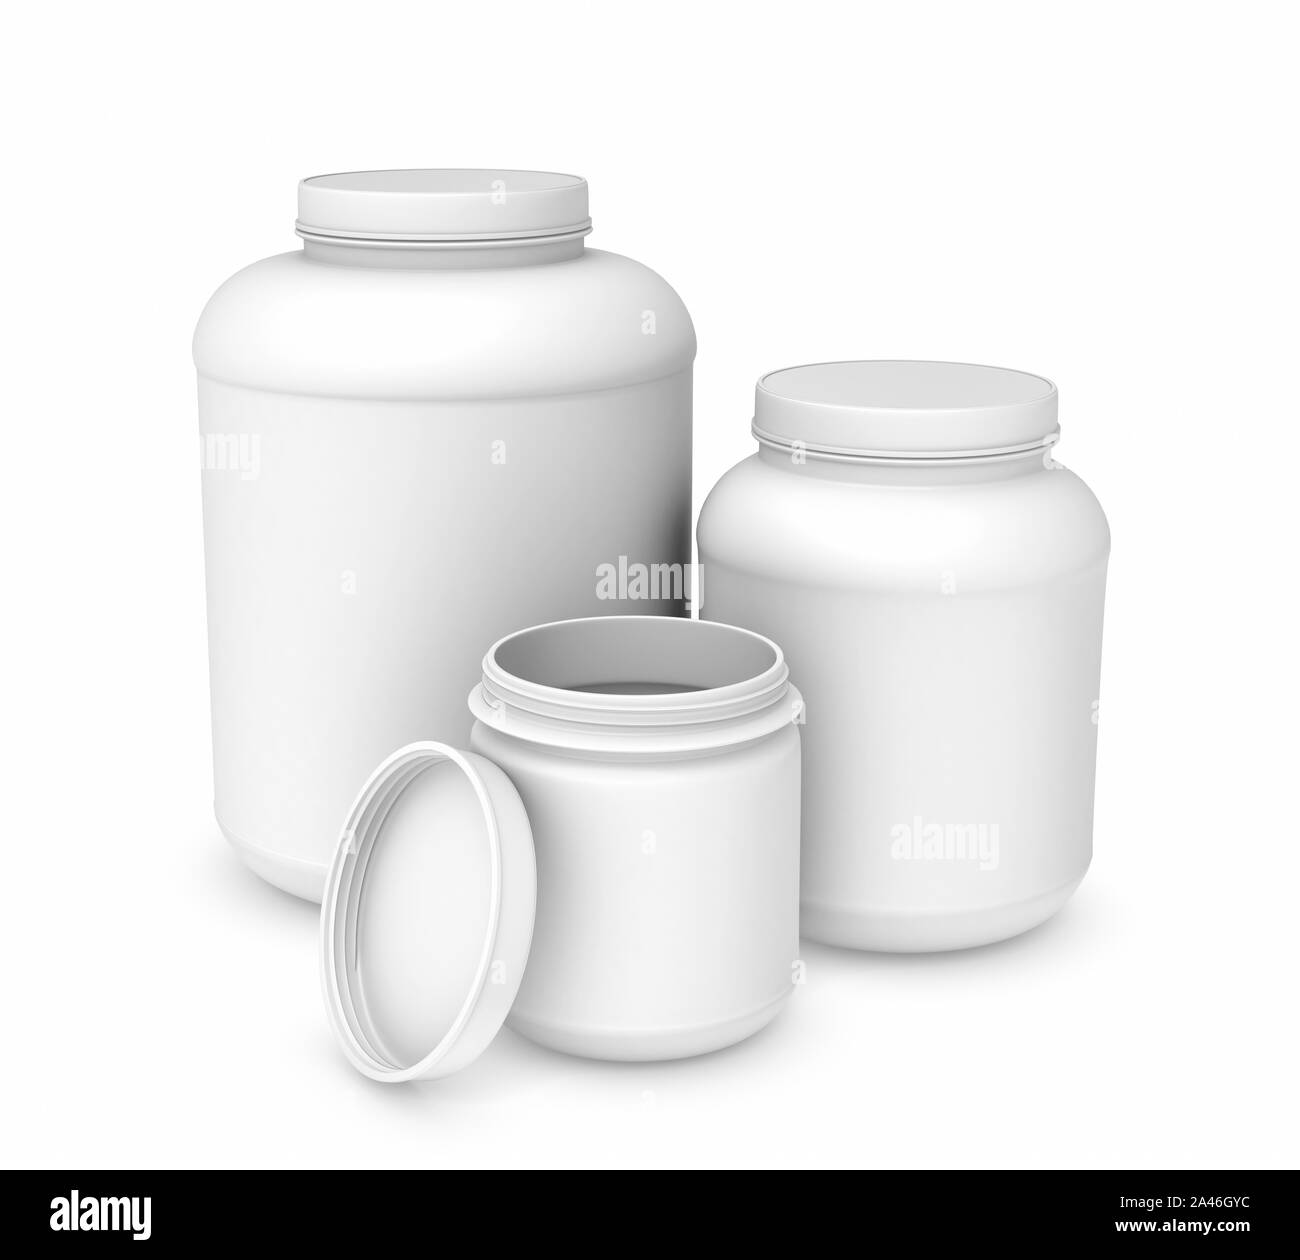 https://c8.alamy.com/comp/2A46GYC/3d-rendering-of-three-blank-white-plastic-jars-of-different-sizes-isolated-on-white-background-cans-and-containers-loading-and-transportation-liqui-2A46GYC.jpg